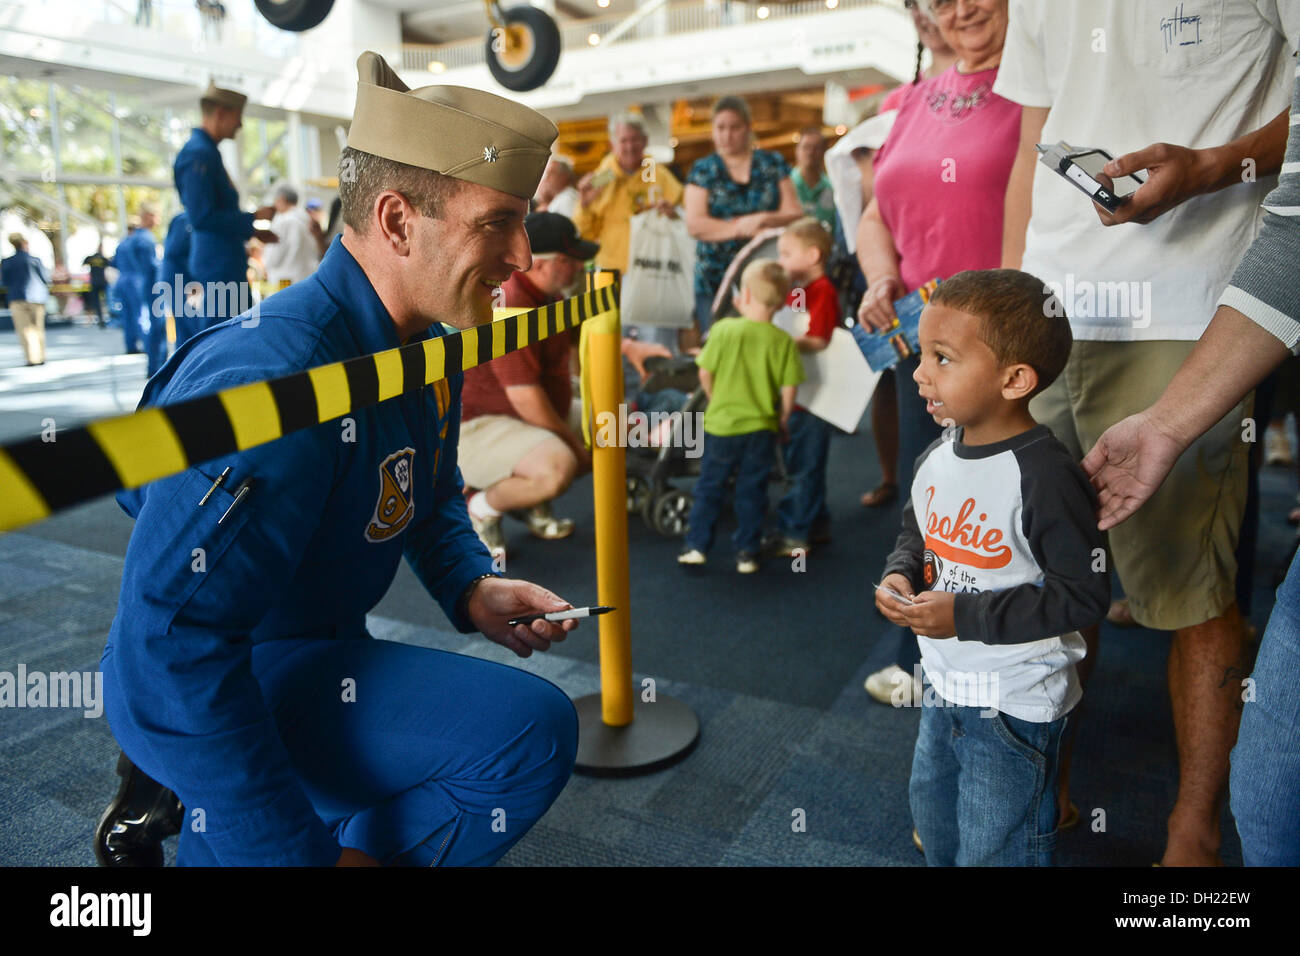 The U.S. Navy Flight Demonstration Squadron, the Blue Angels, commanding officer and flight leader, Cmdr. Thomas Frosch, from Clinton Township, Mich., signs autographs at the National Naval Aviation Museum at Naval Air Station Pensacola. While the U.S. Na Stock Photo